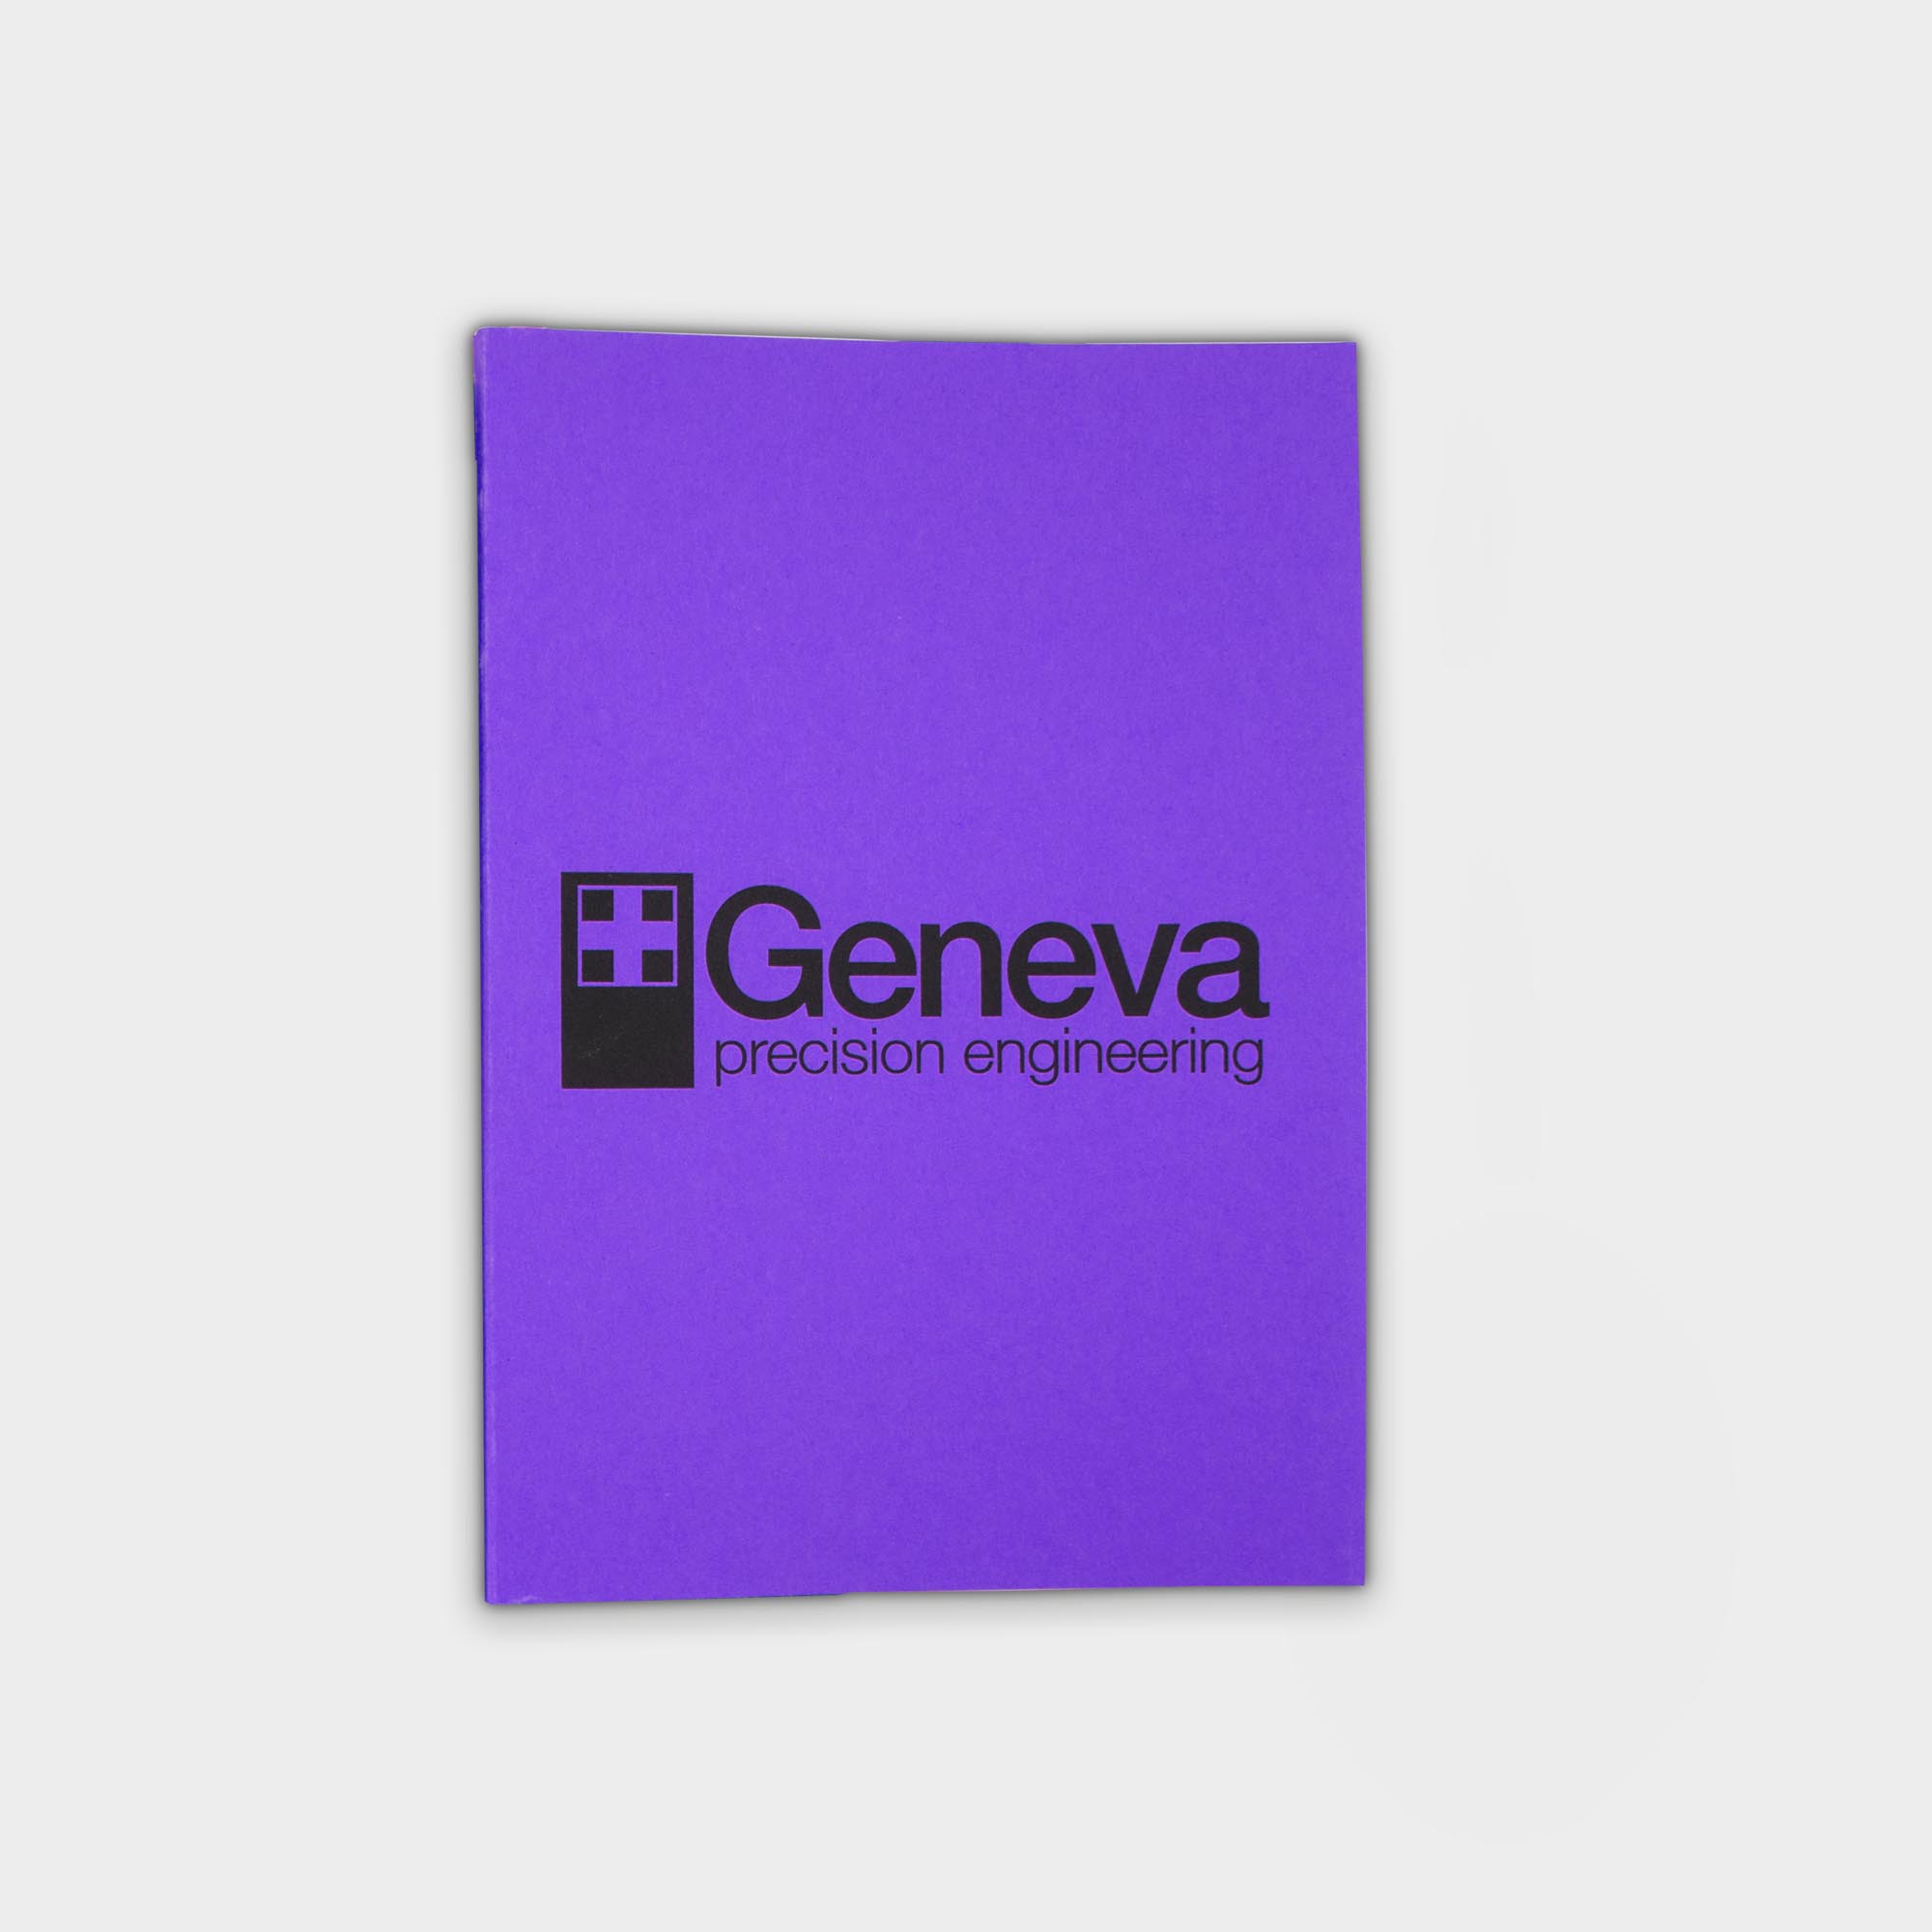 The Green & Good A5 Perfect Bound Notebook made from recycled till receipts. 170gsm recycled coloured cover with 50 sheets of white 80gsm recycled paper. Plain paper content as standard. Lined and squared paper are optional. Purple